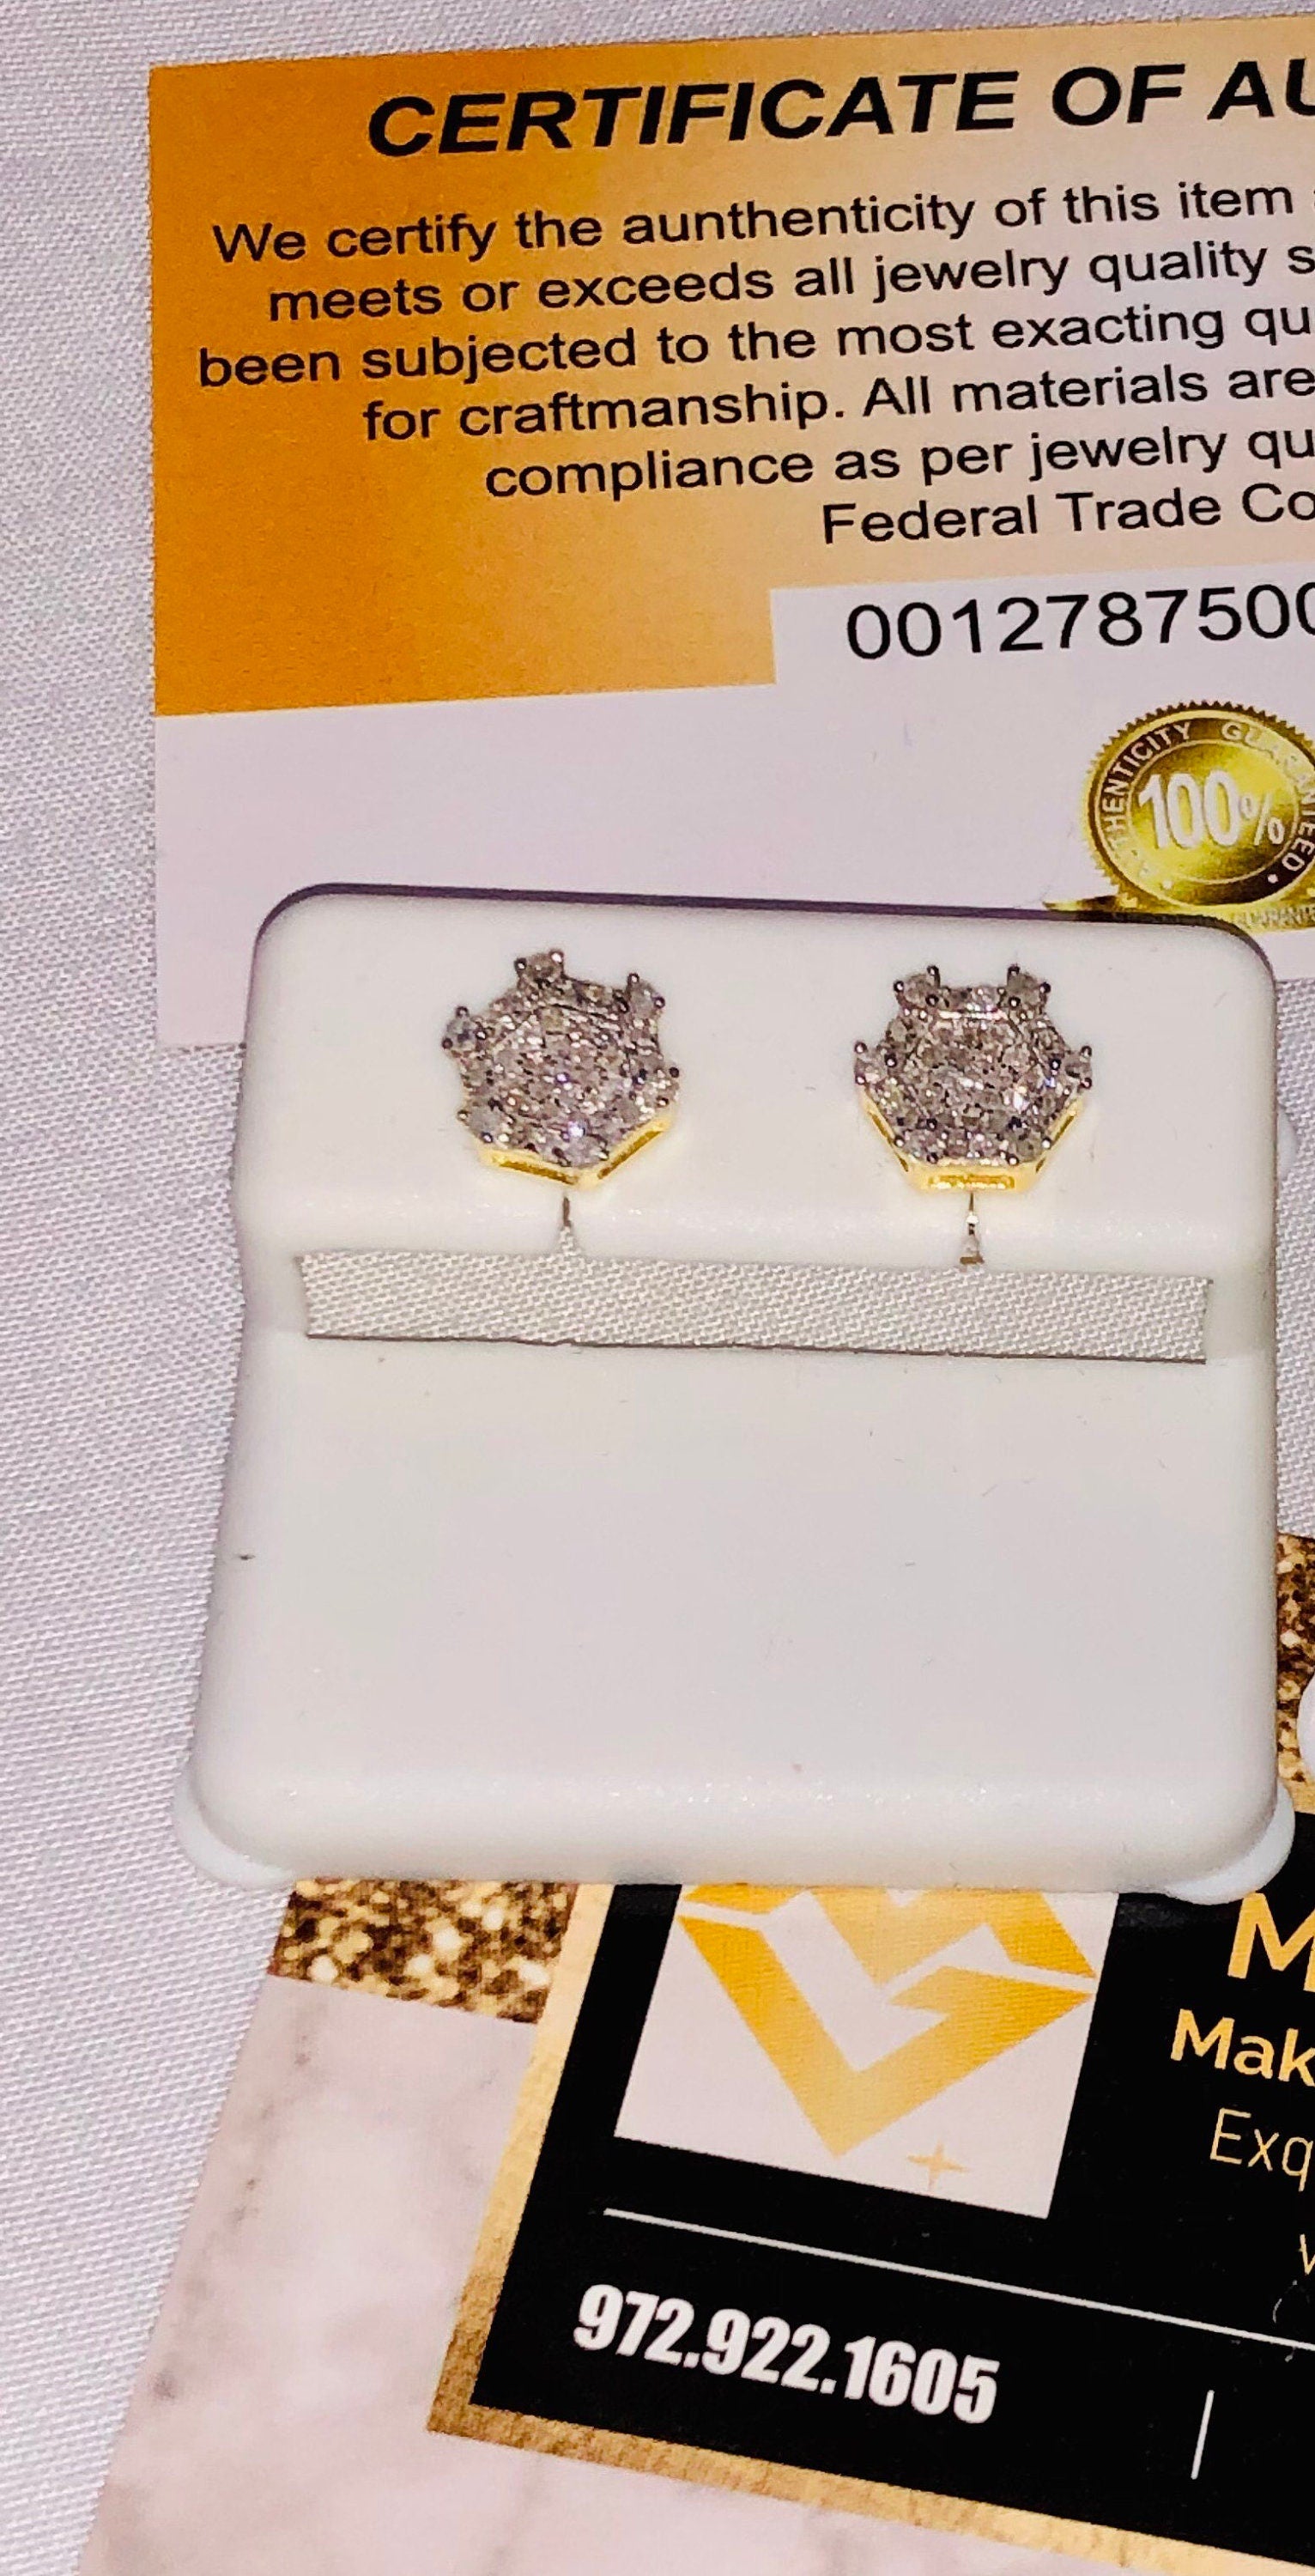 10k yellow gold vermeil real diamond earrings, screw back authentic natural diamond studs for men, free shipping, authenticity card included